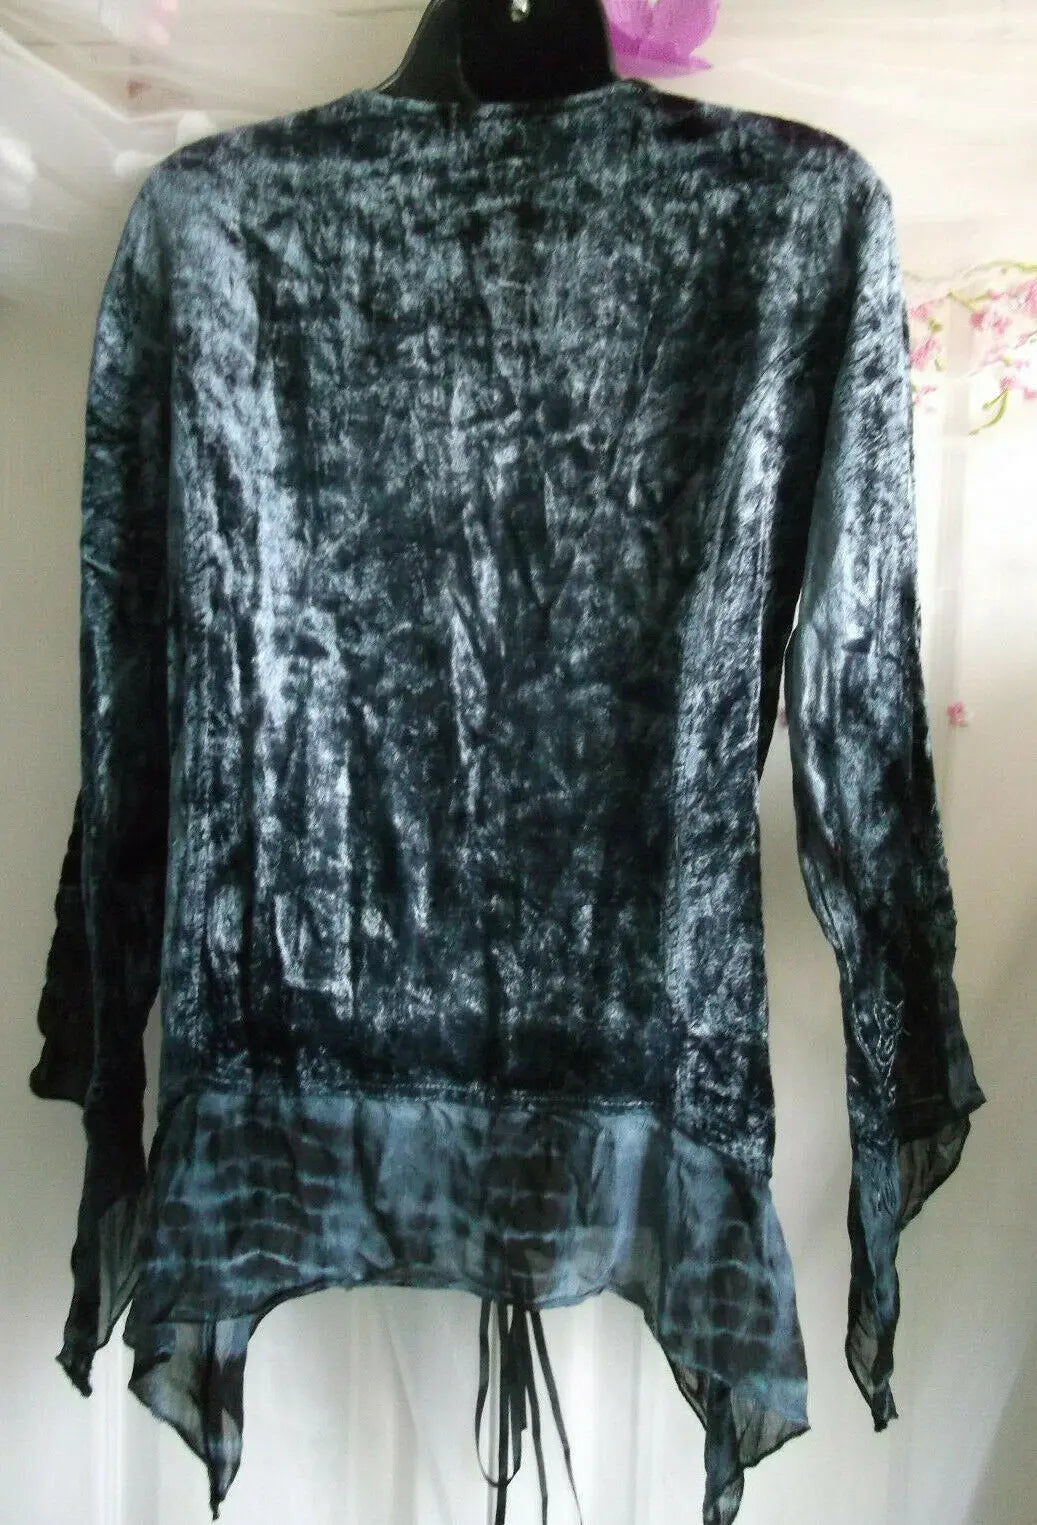 tie-died velvet lace-up floaty ladies top,long sleeve.size 14. loose fit.new Unbranded